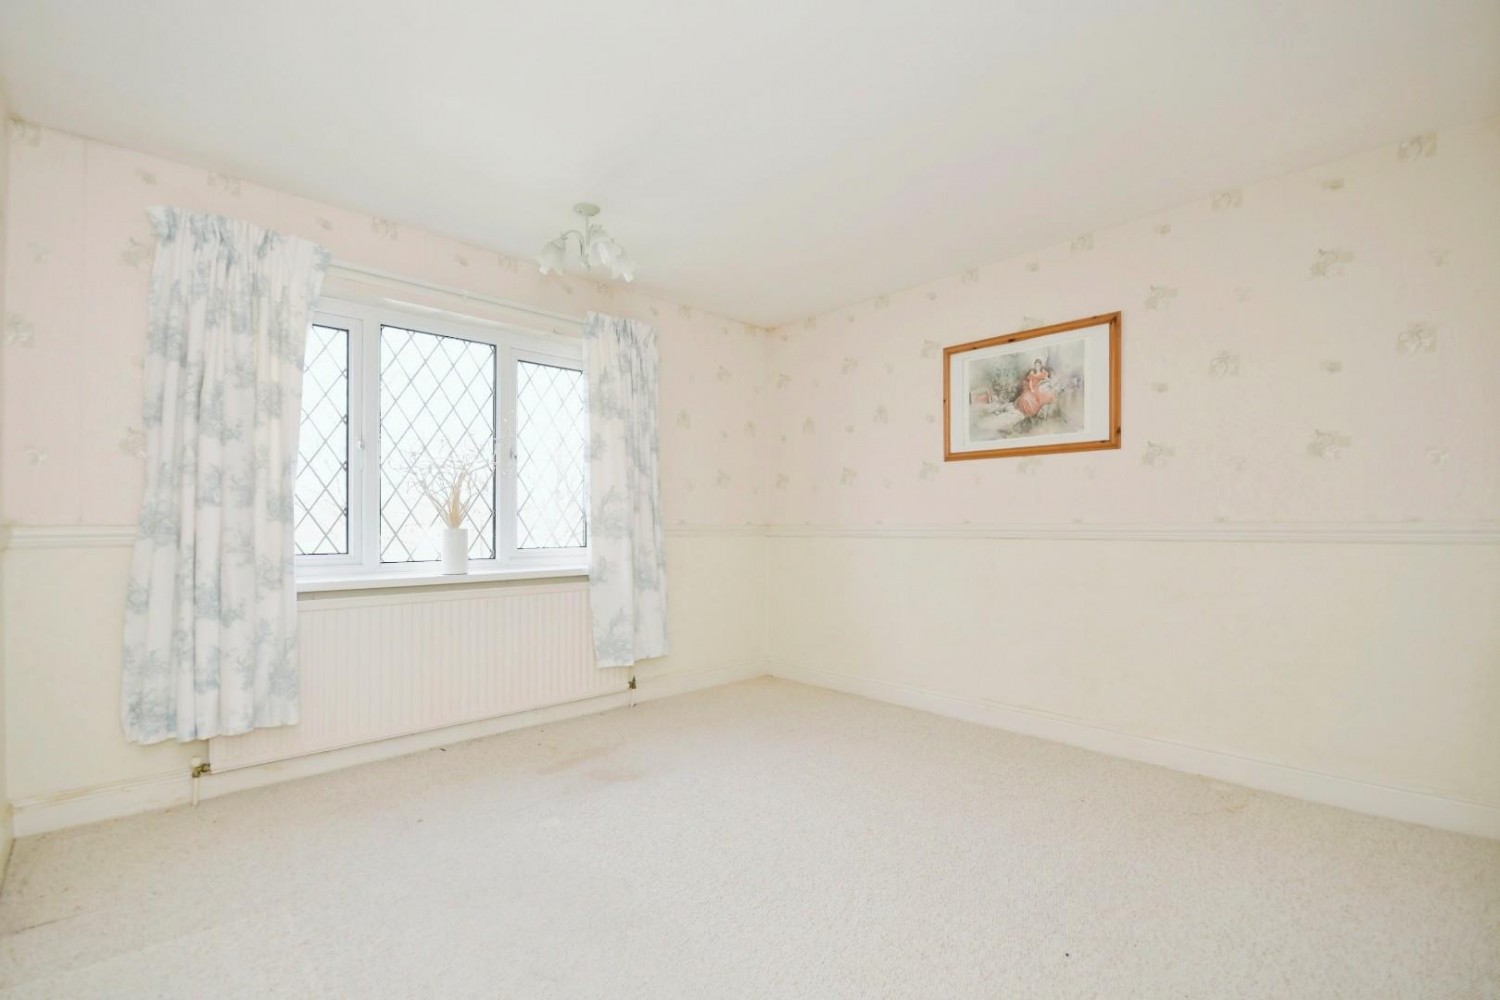 Quantock Way, Loundsley Green, Chesterfield, S40 4LL